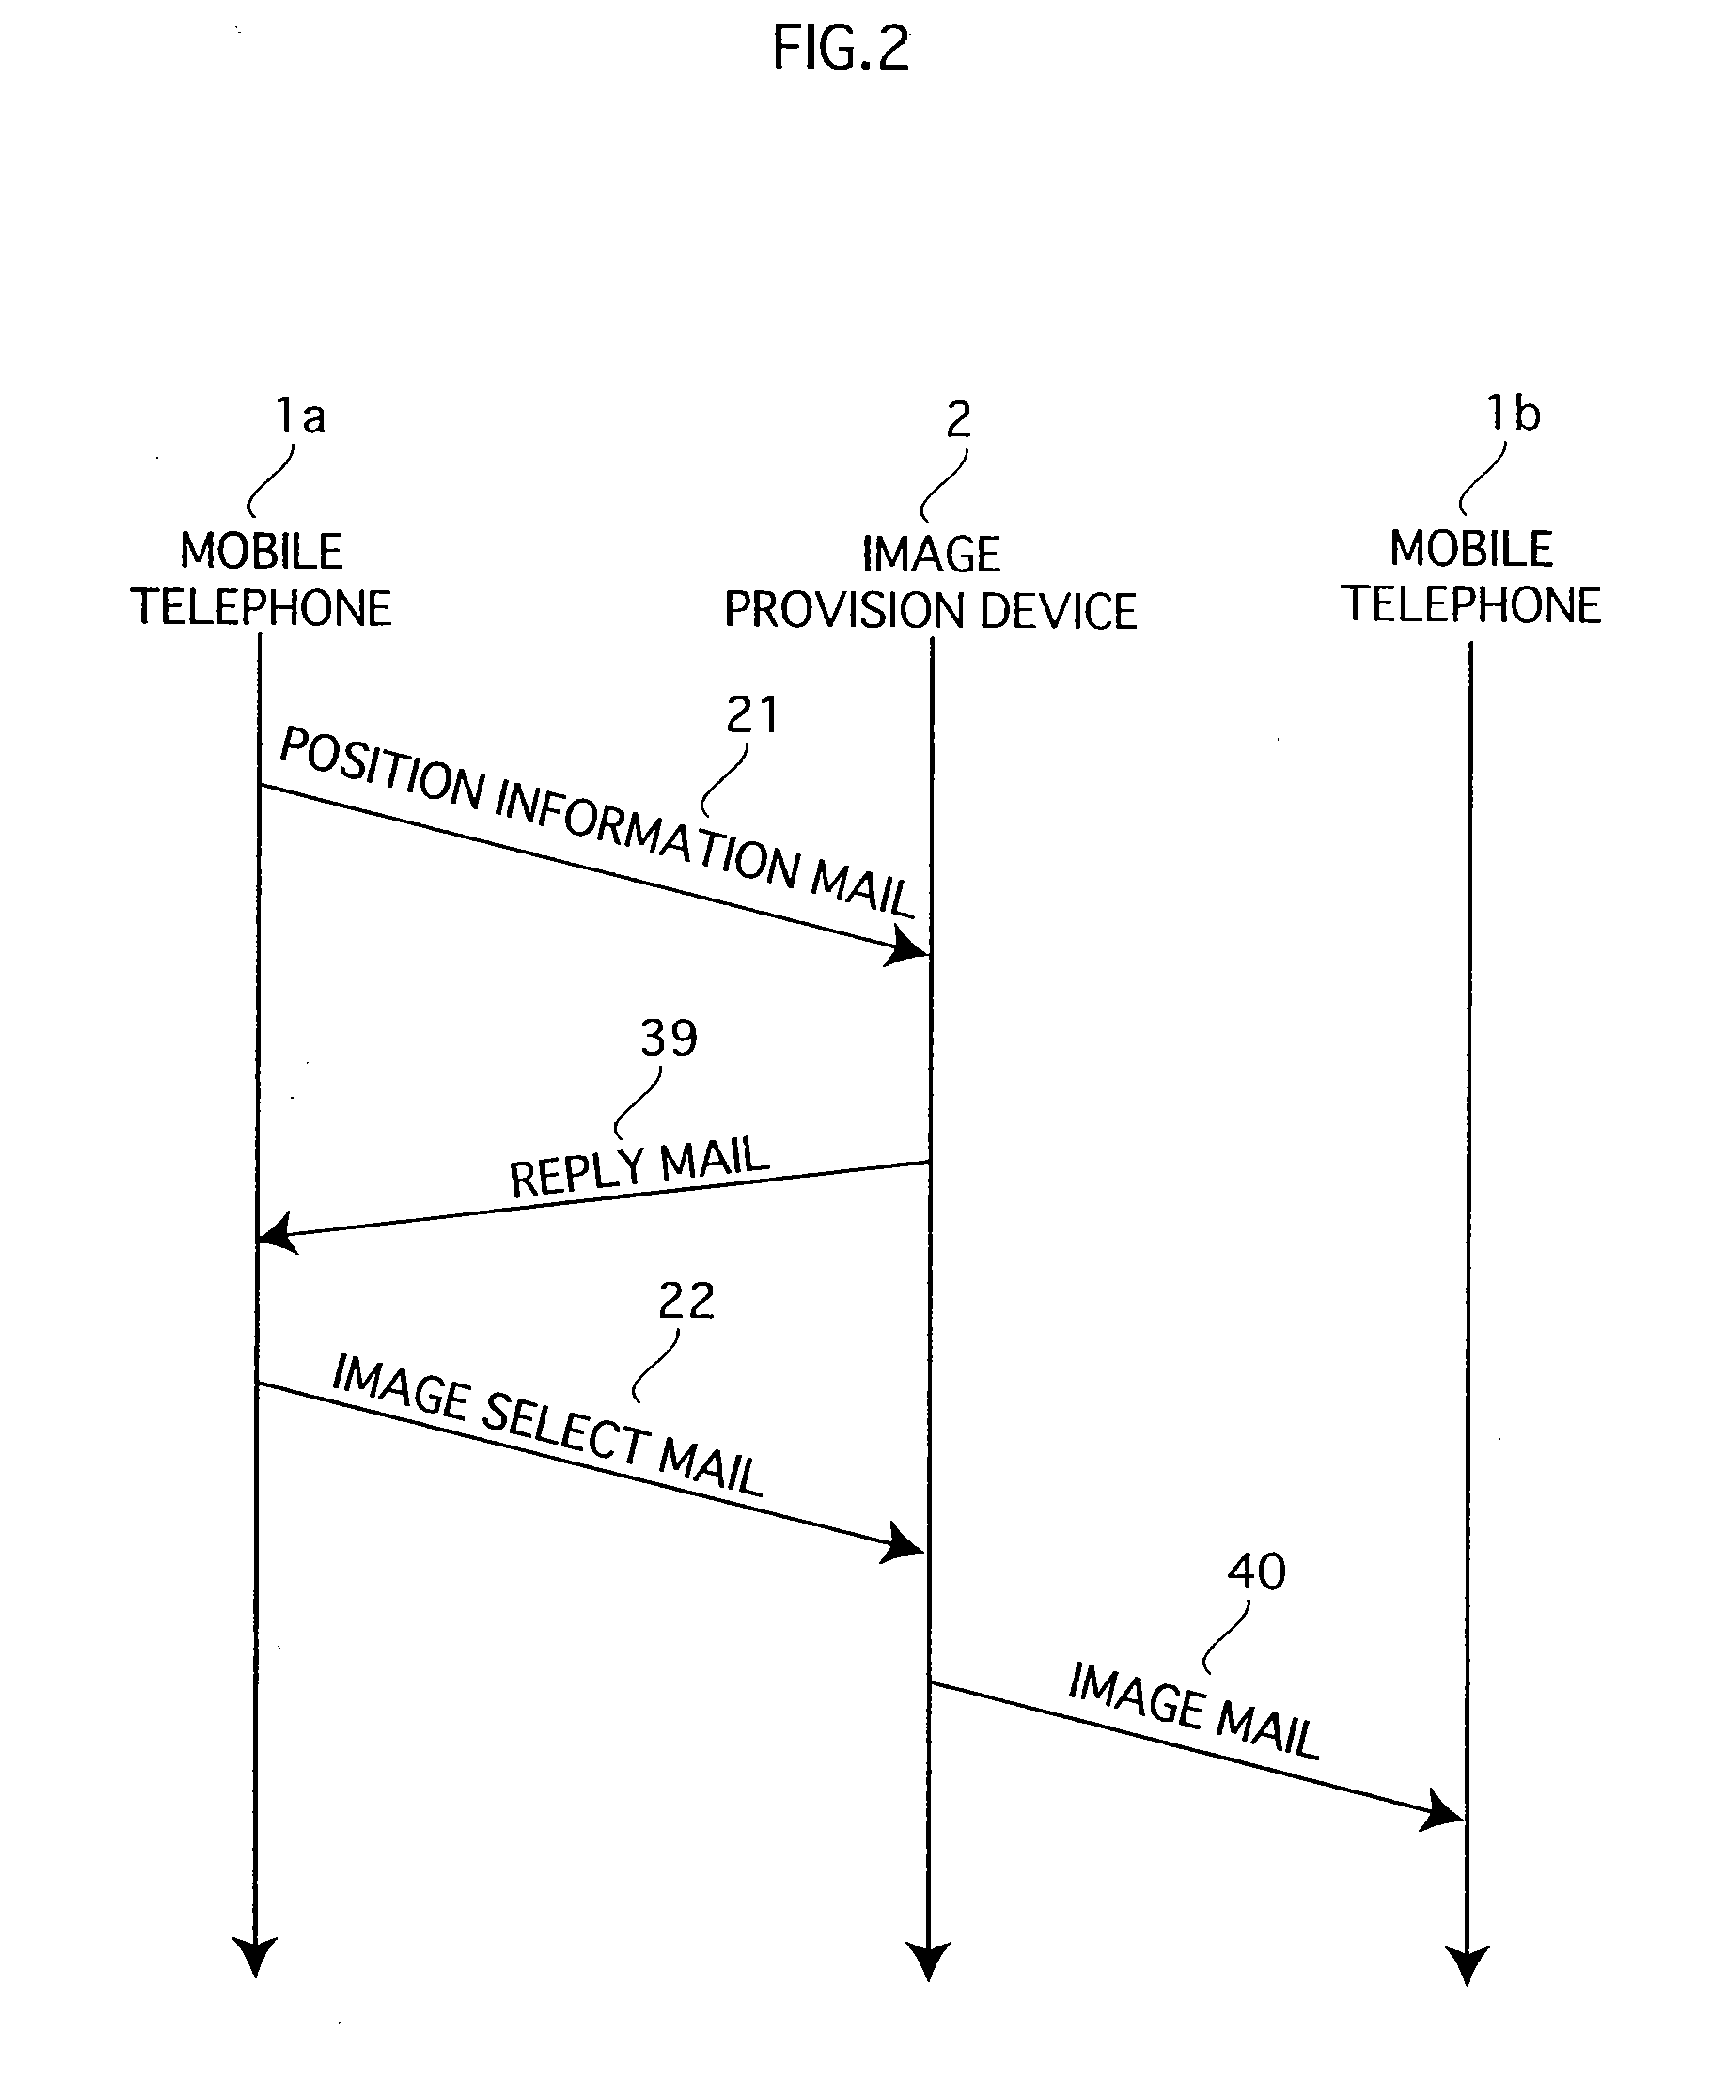 Image provision device and image provision system